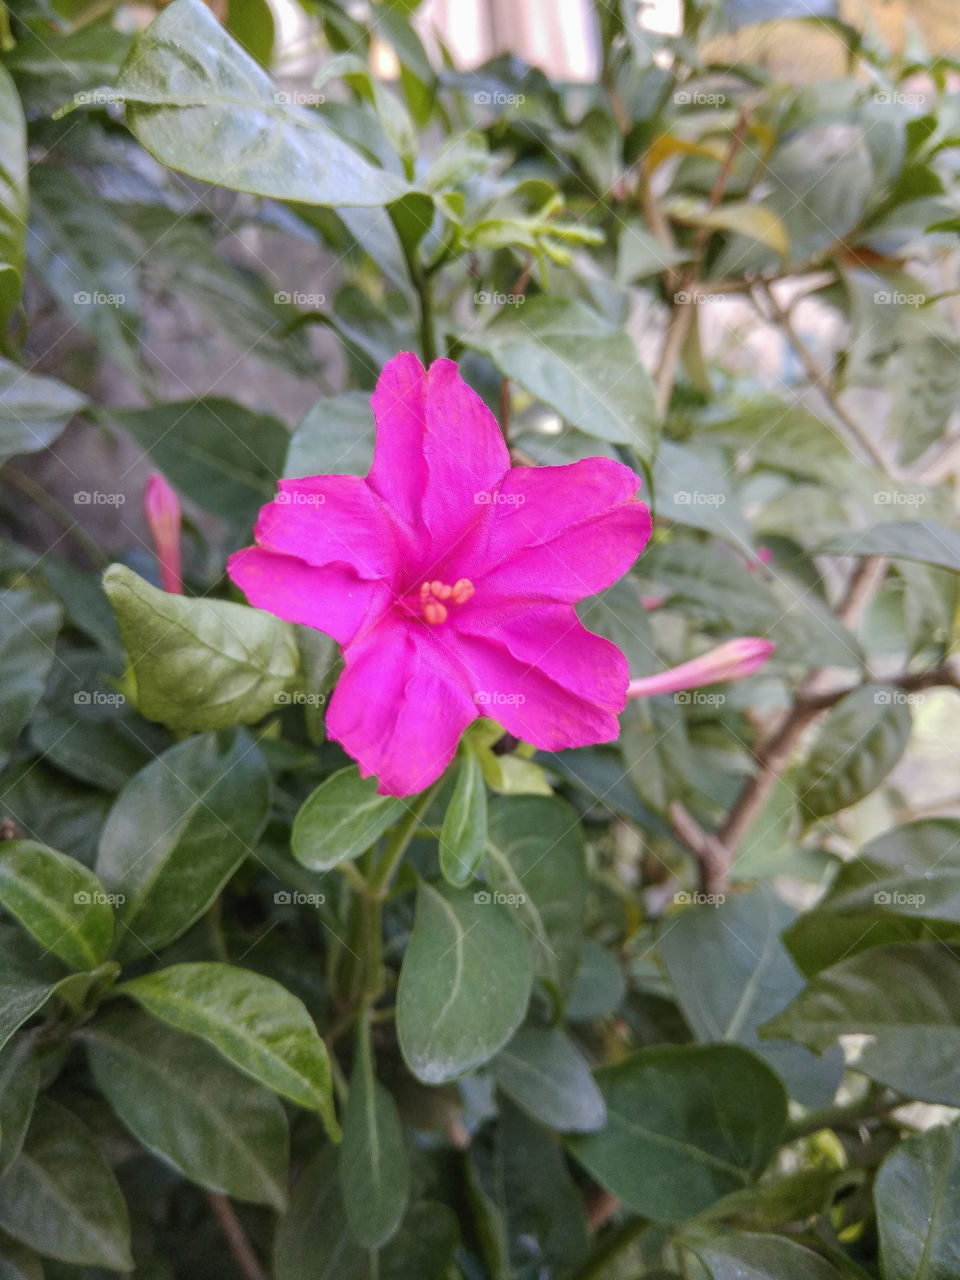 Sandha Maloti (common name)  Mirabilis jalapa , the marvel of Peruor four o'clock flower, is the most commonly grown ornamental species of Mirabilis plant, and is available in a range of colours